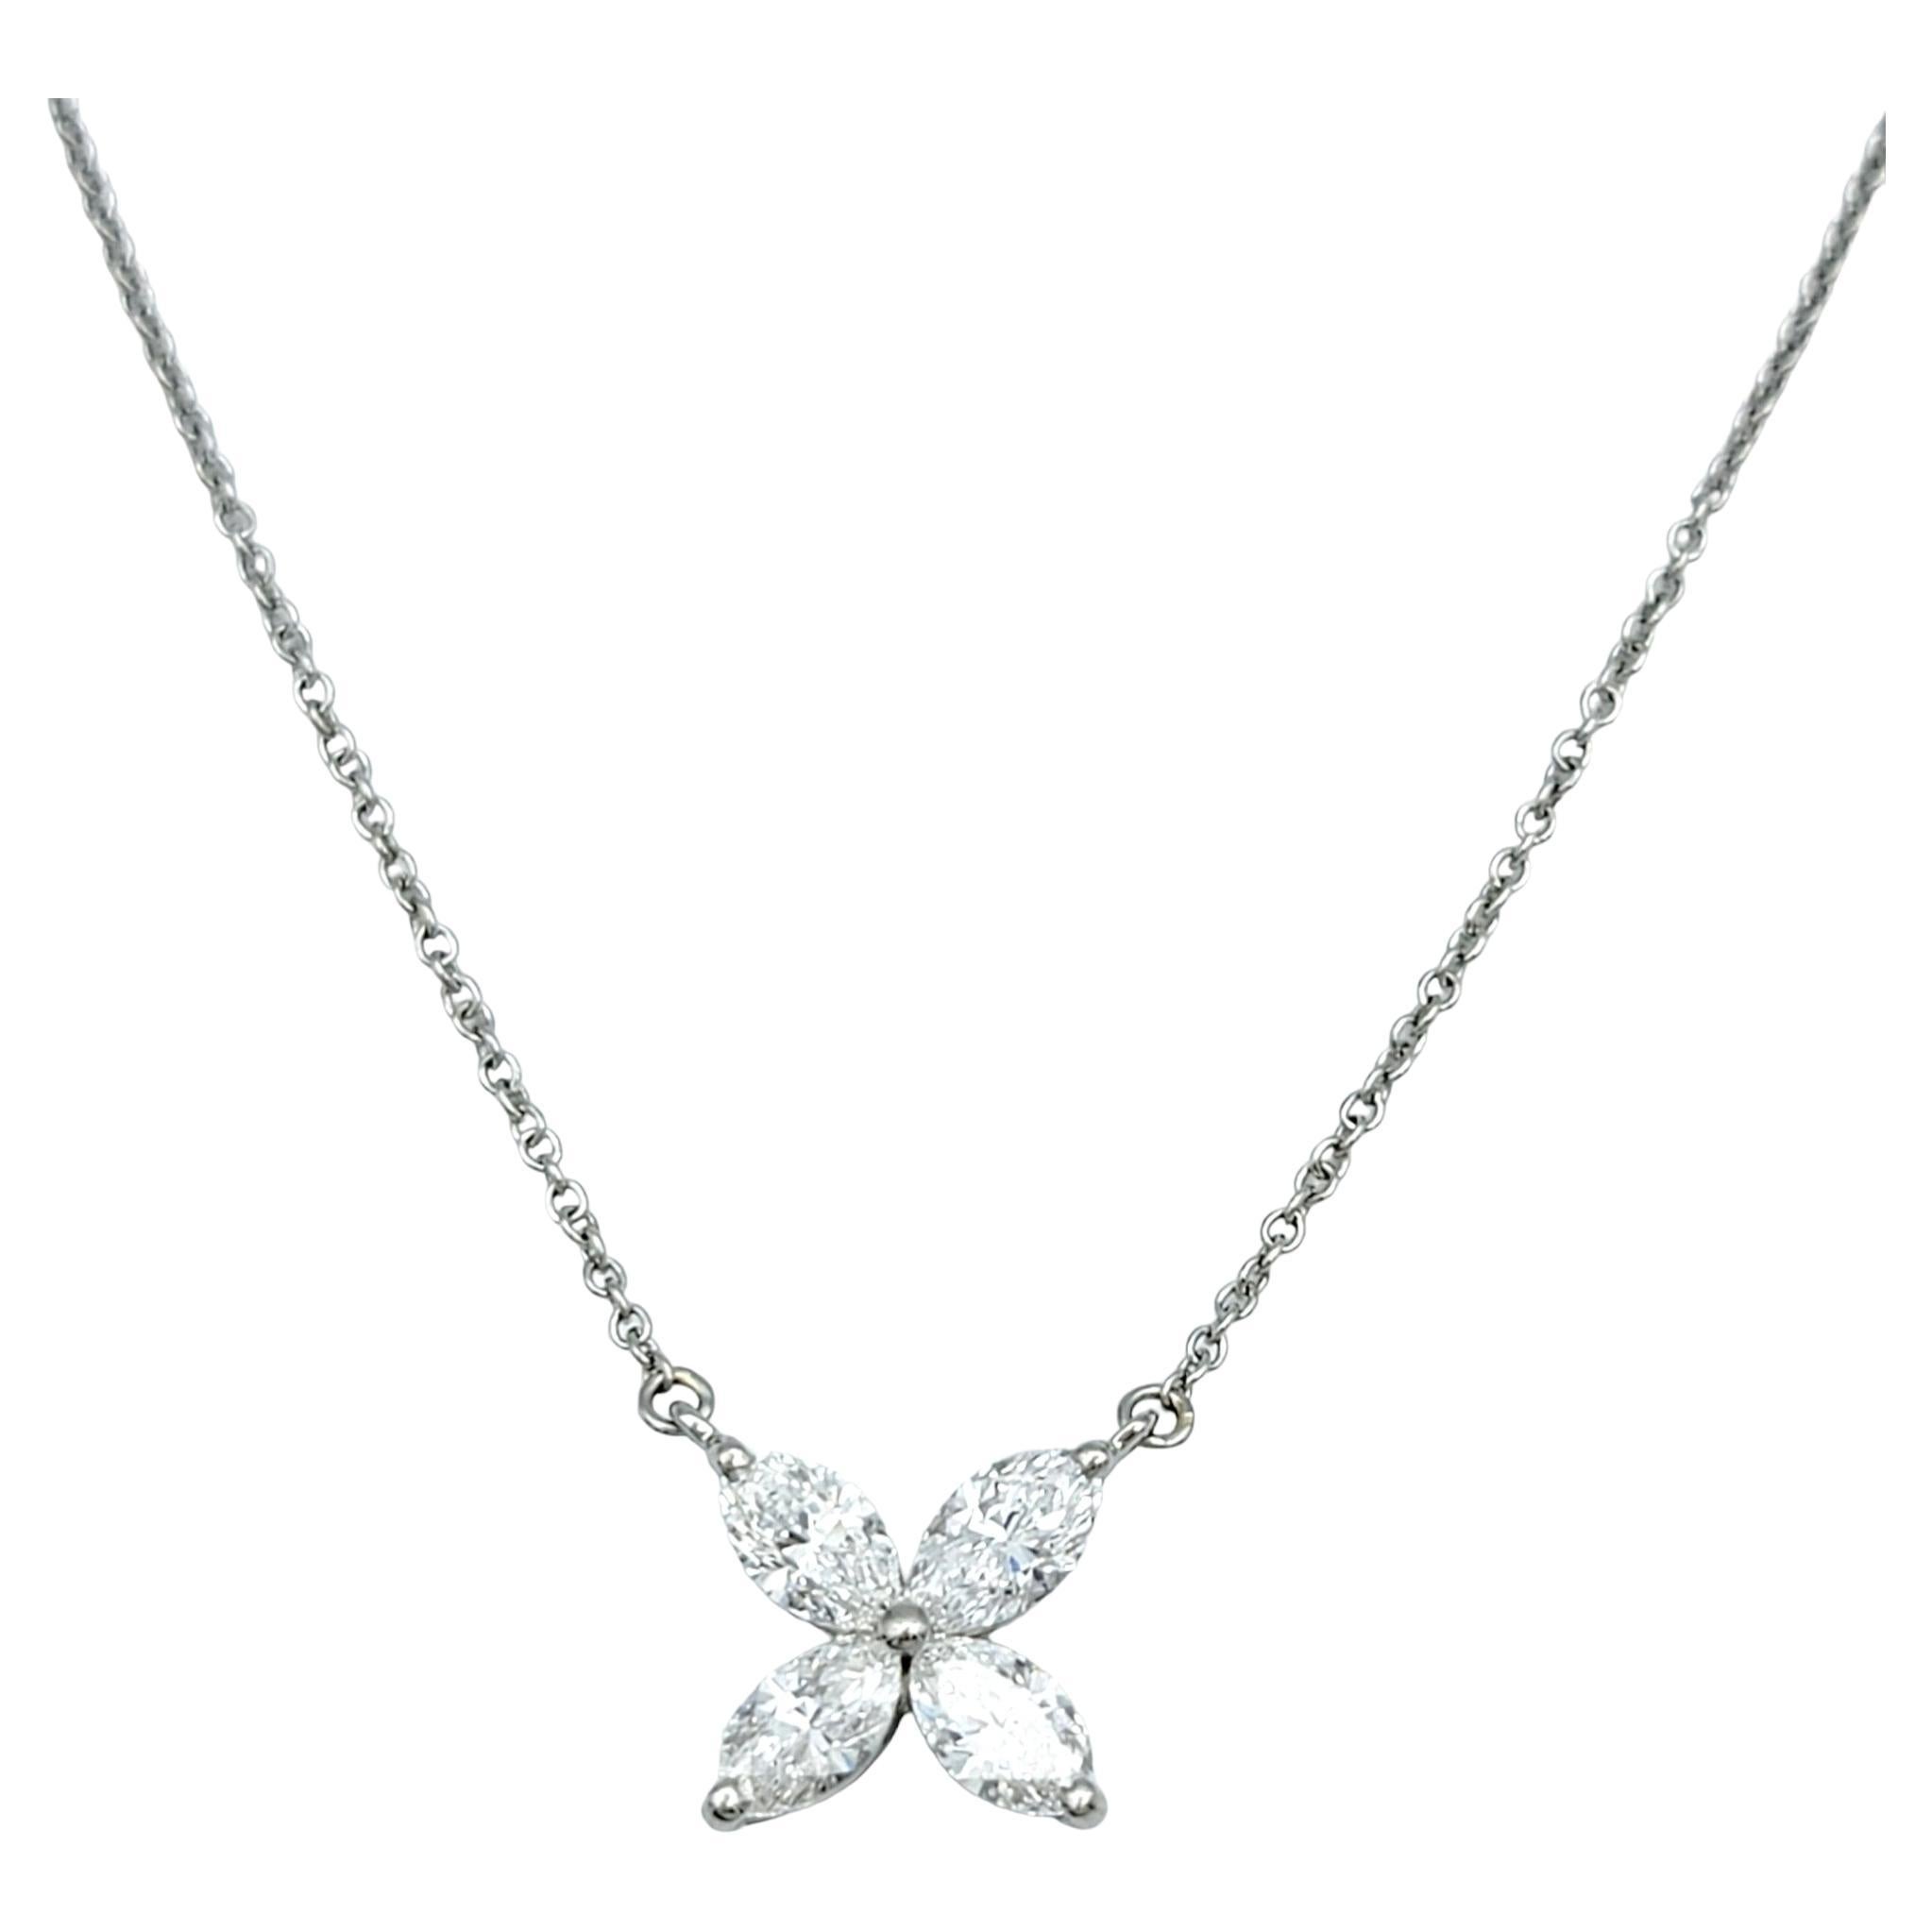 Introducing the epitome of elegance: The Tiffany & Co. Victoria Pendant Necklace in platinum. This exquisite piece features four captivating marquise-shaped diamonds, meticulously set to radiate timeless beauty. Totaling a breathtaking 0.81 carats,